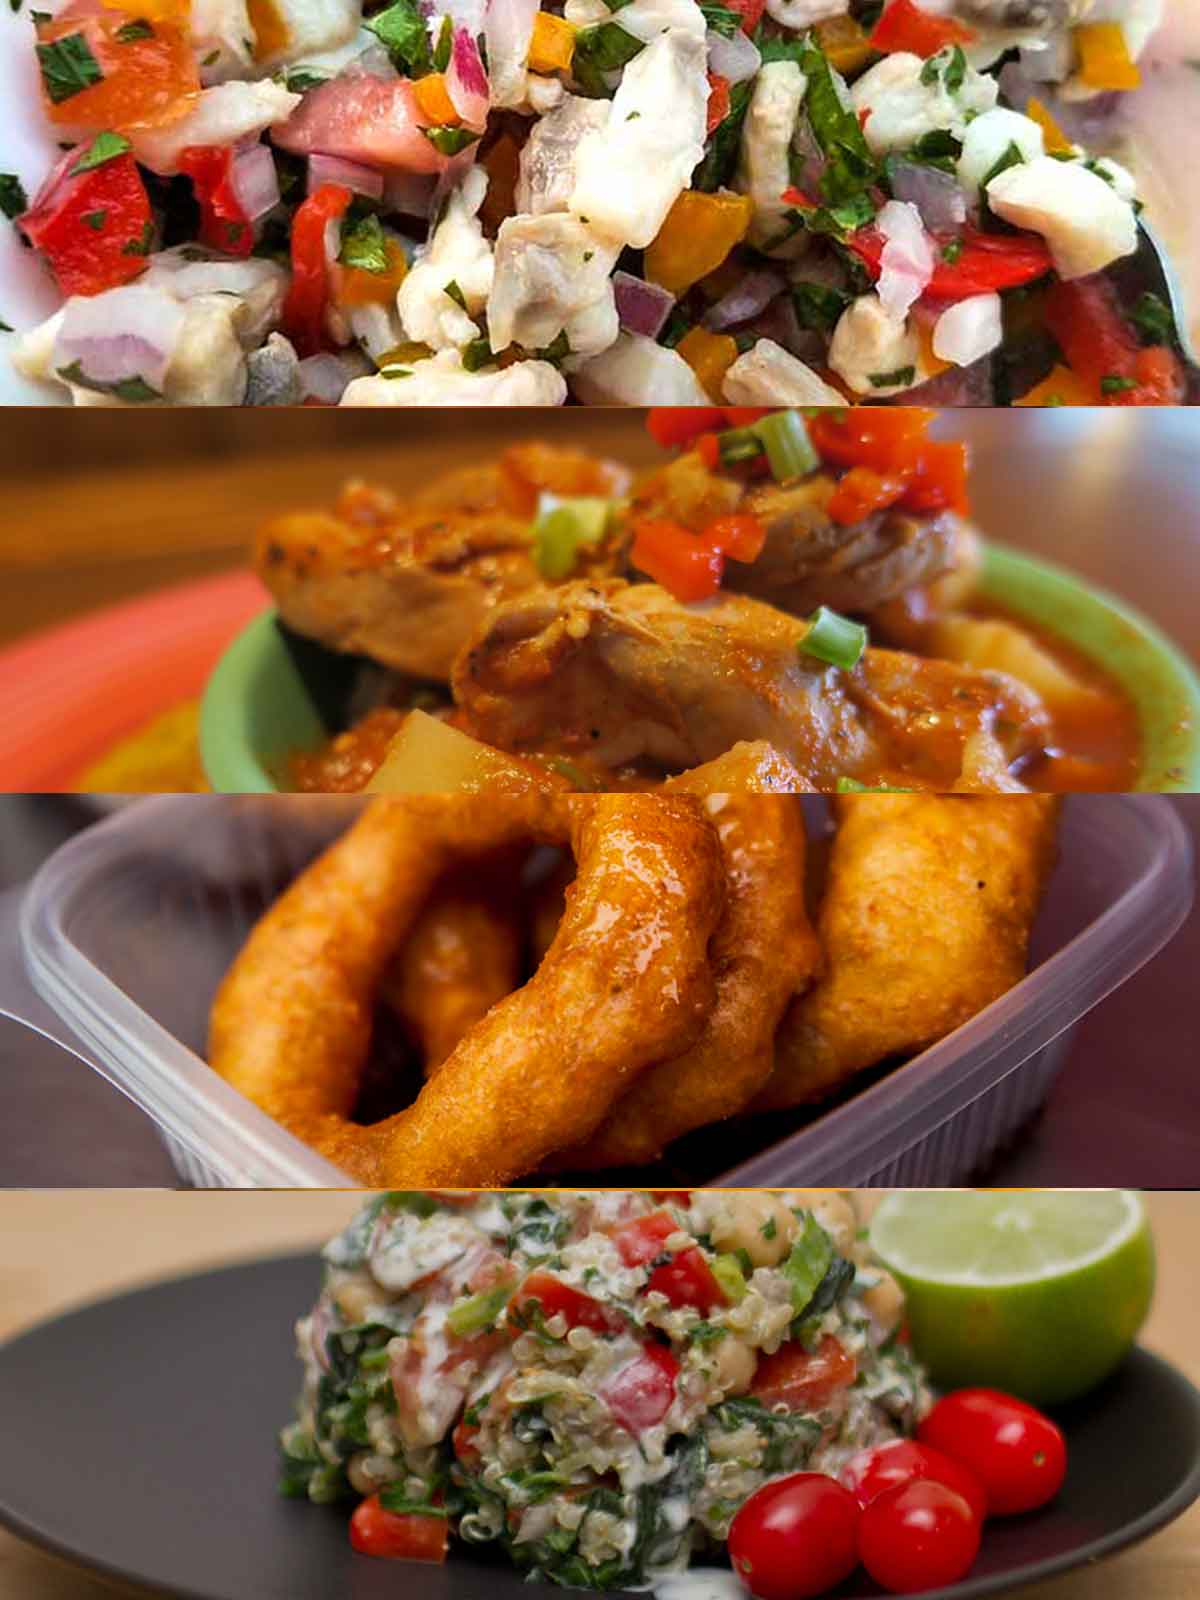 A collection of Peruvian dishes